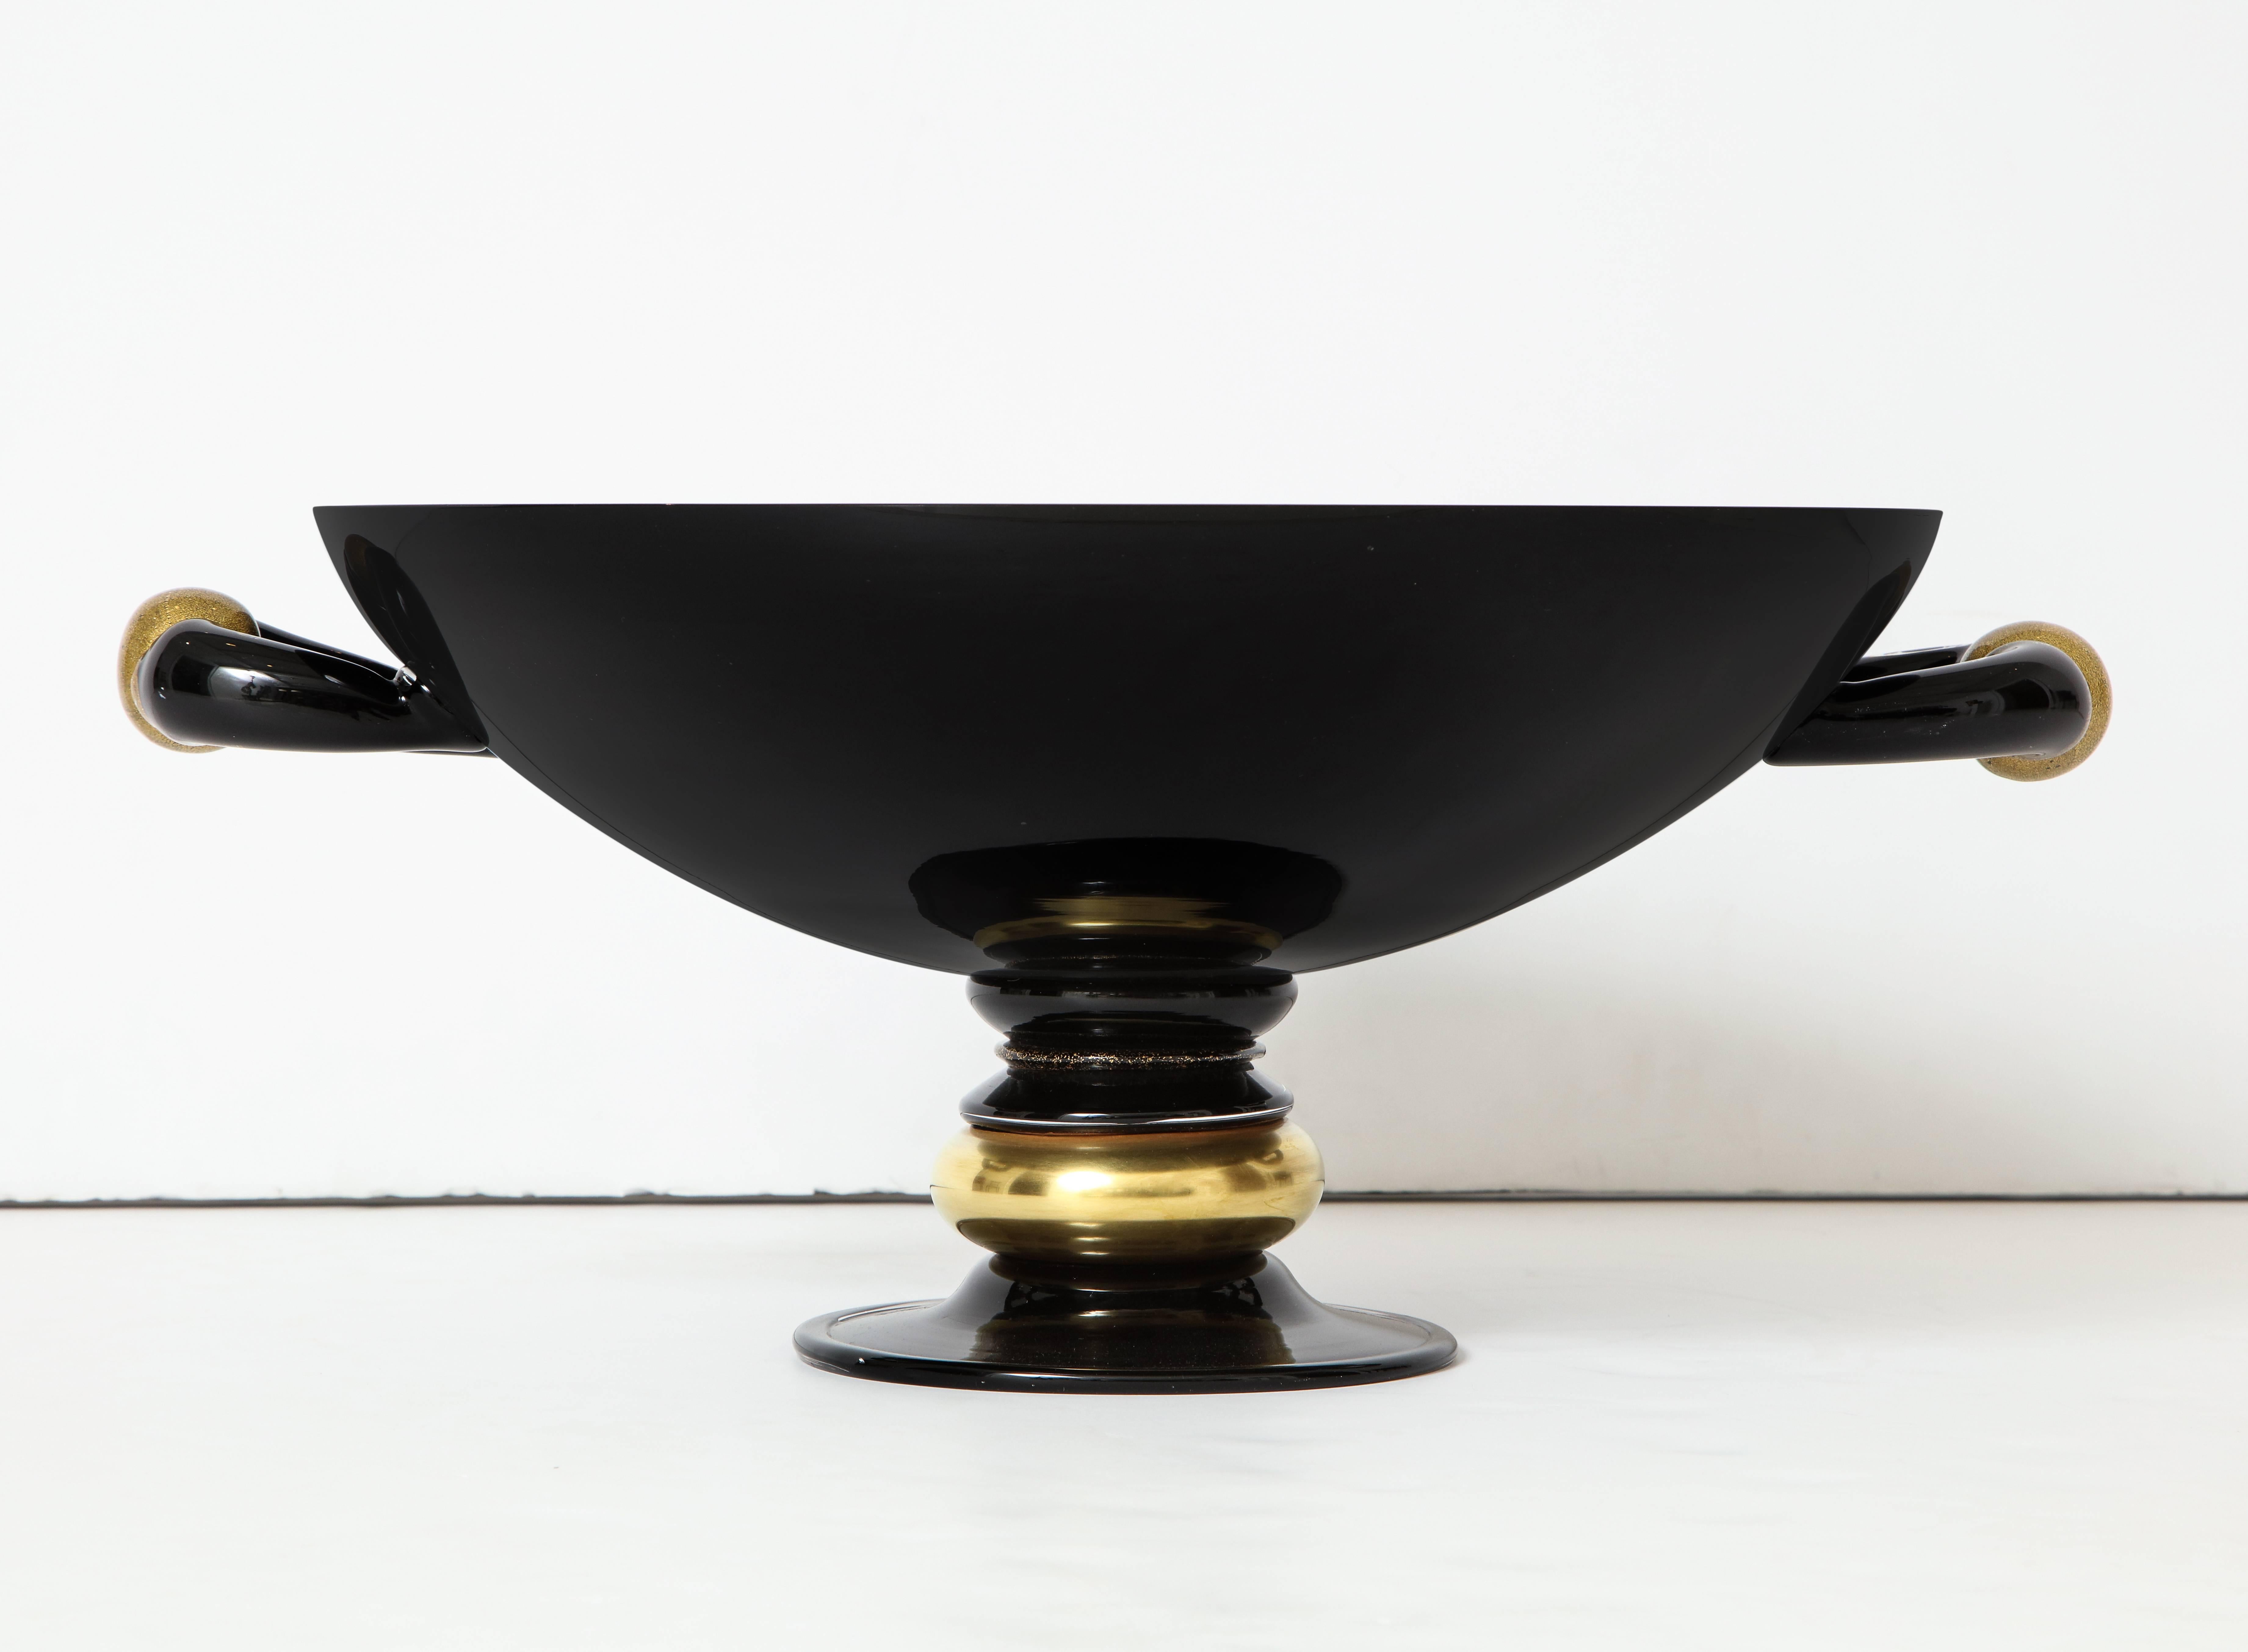 Large centrepiece bowl with a segmented base and applied handles and a neoclassical mien. Black with gold accents. Made by Seguso for Loren Marsh, circa 1989. According to a Seguso executive, the applied handles, with their gold-flecked circular